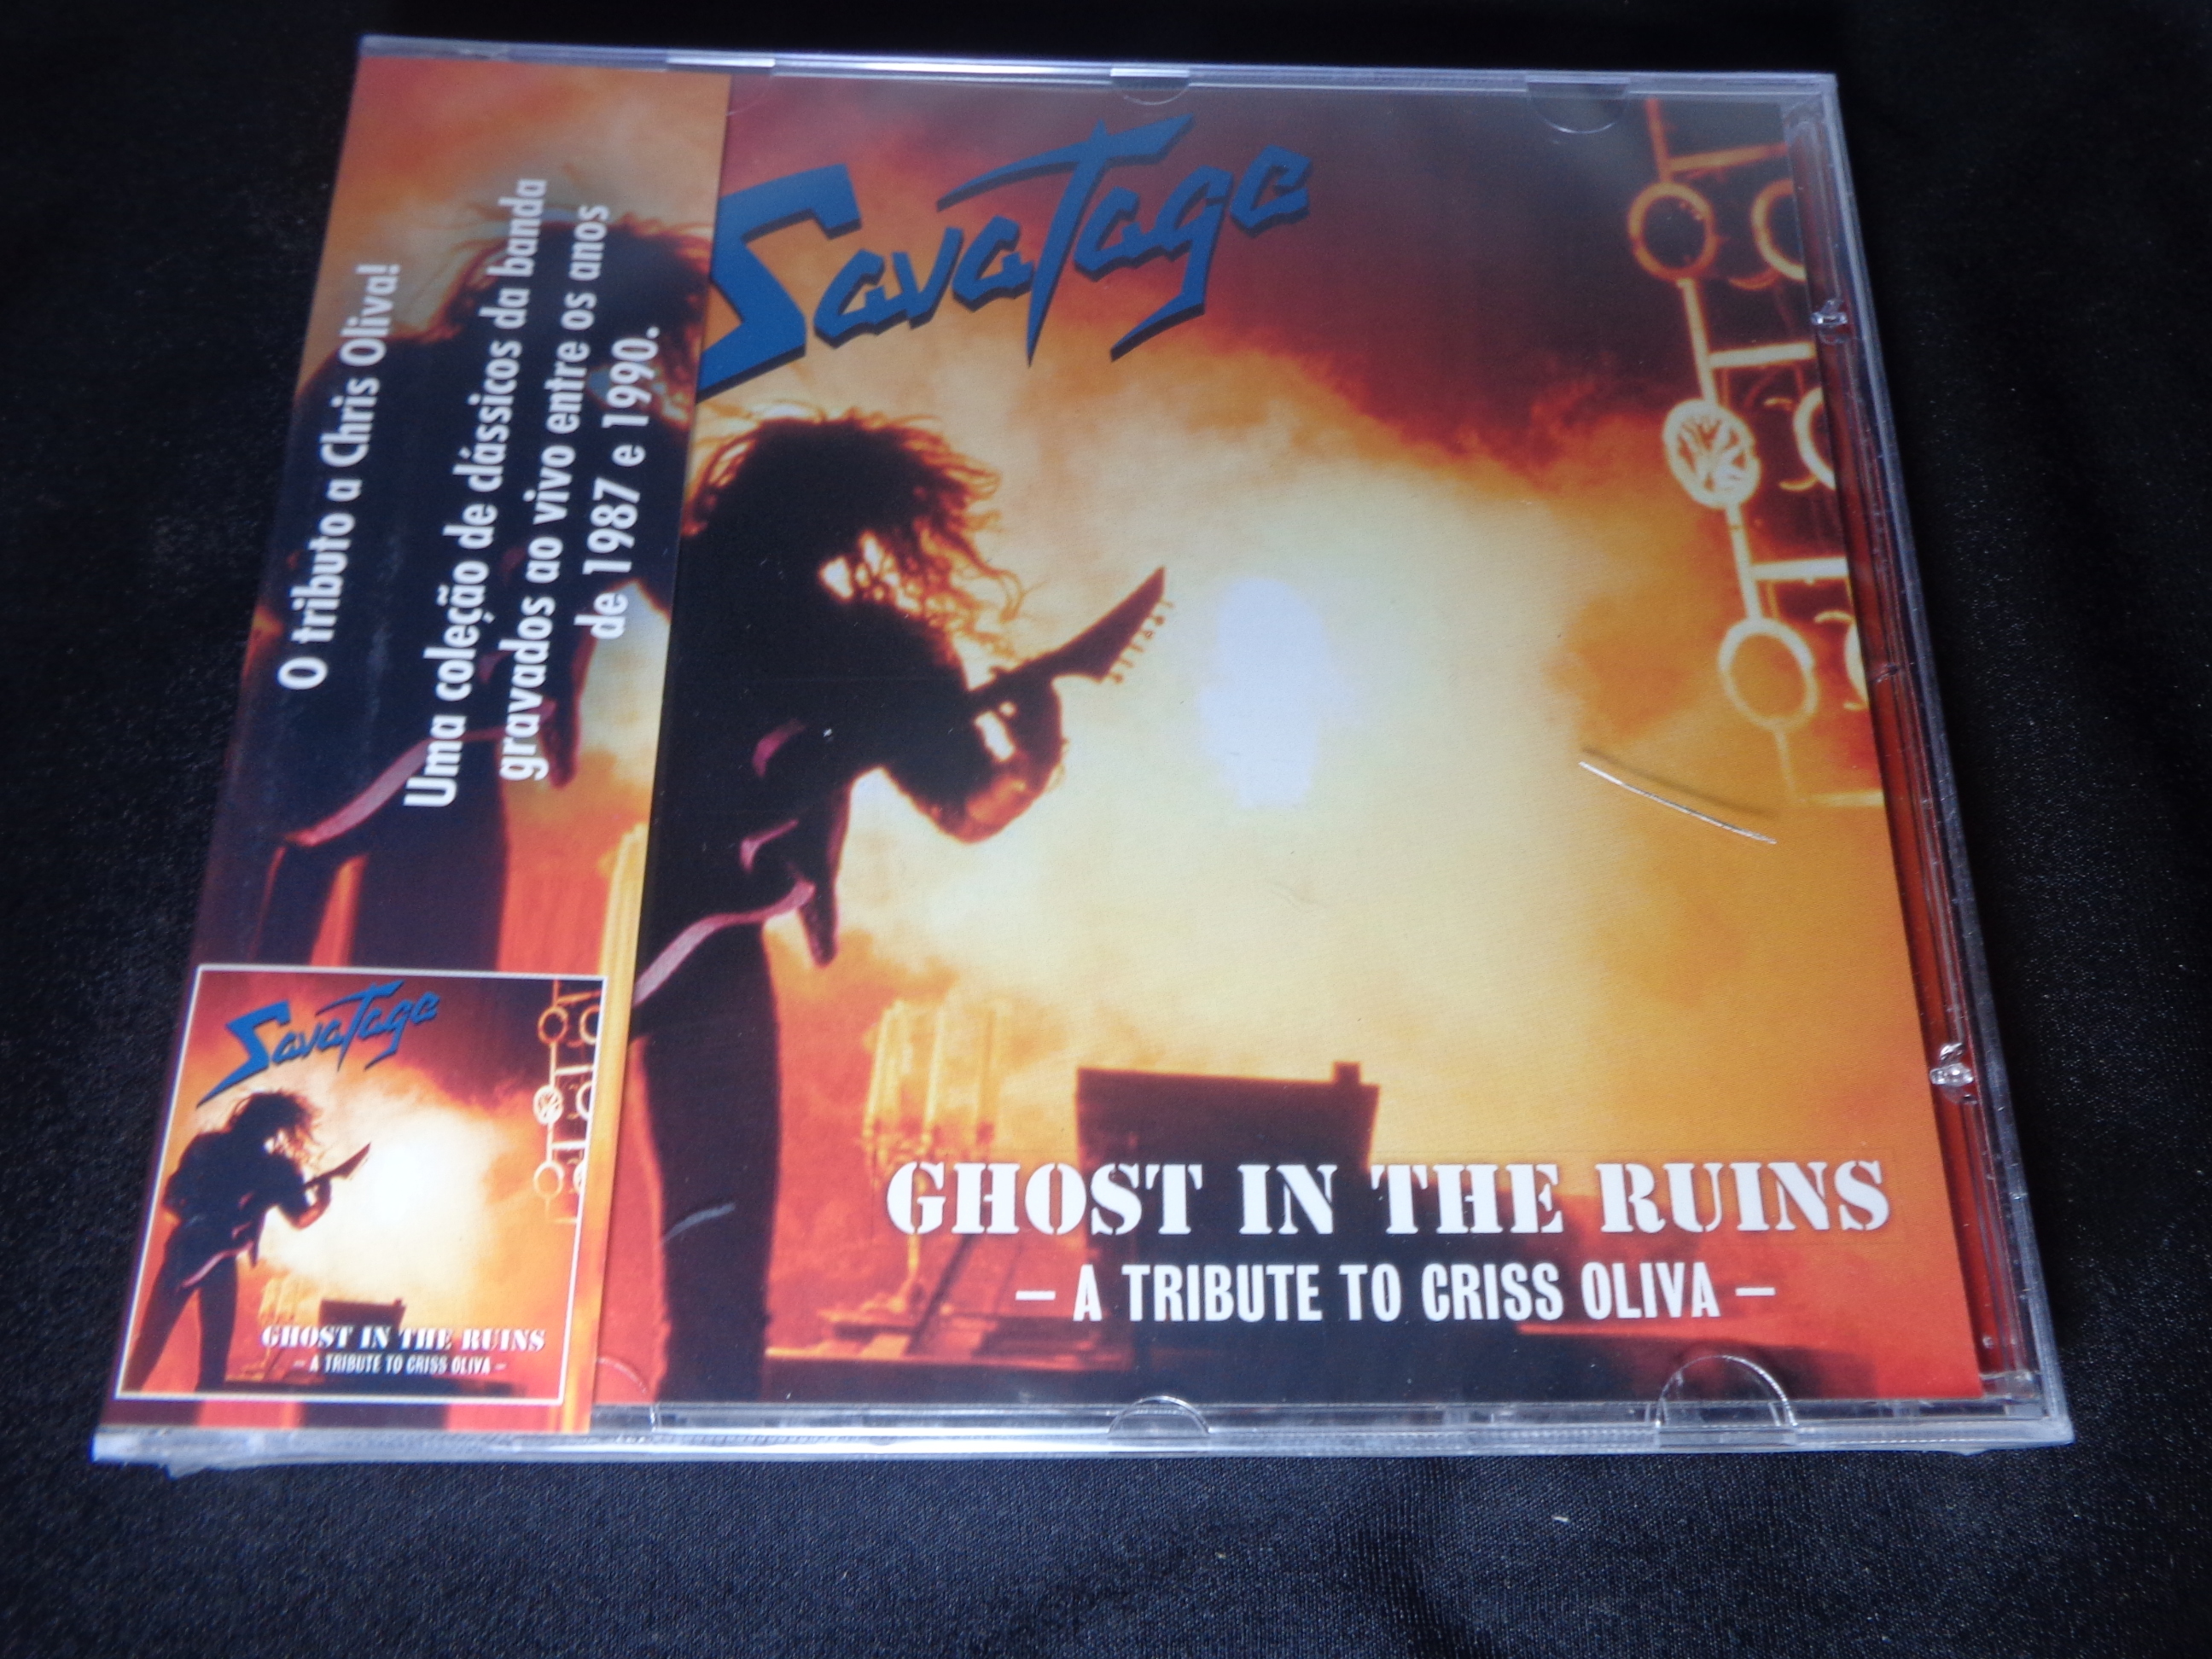 CD - Savatage - Ghost in the Ruins a Tribute to Criss Oliva